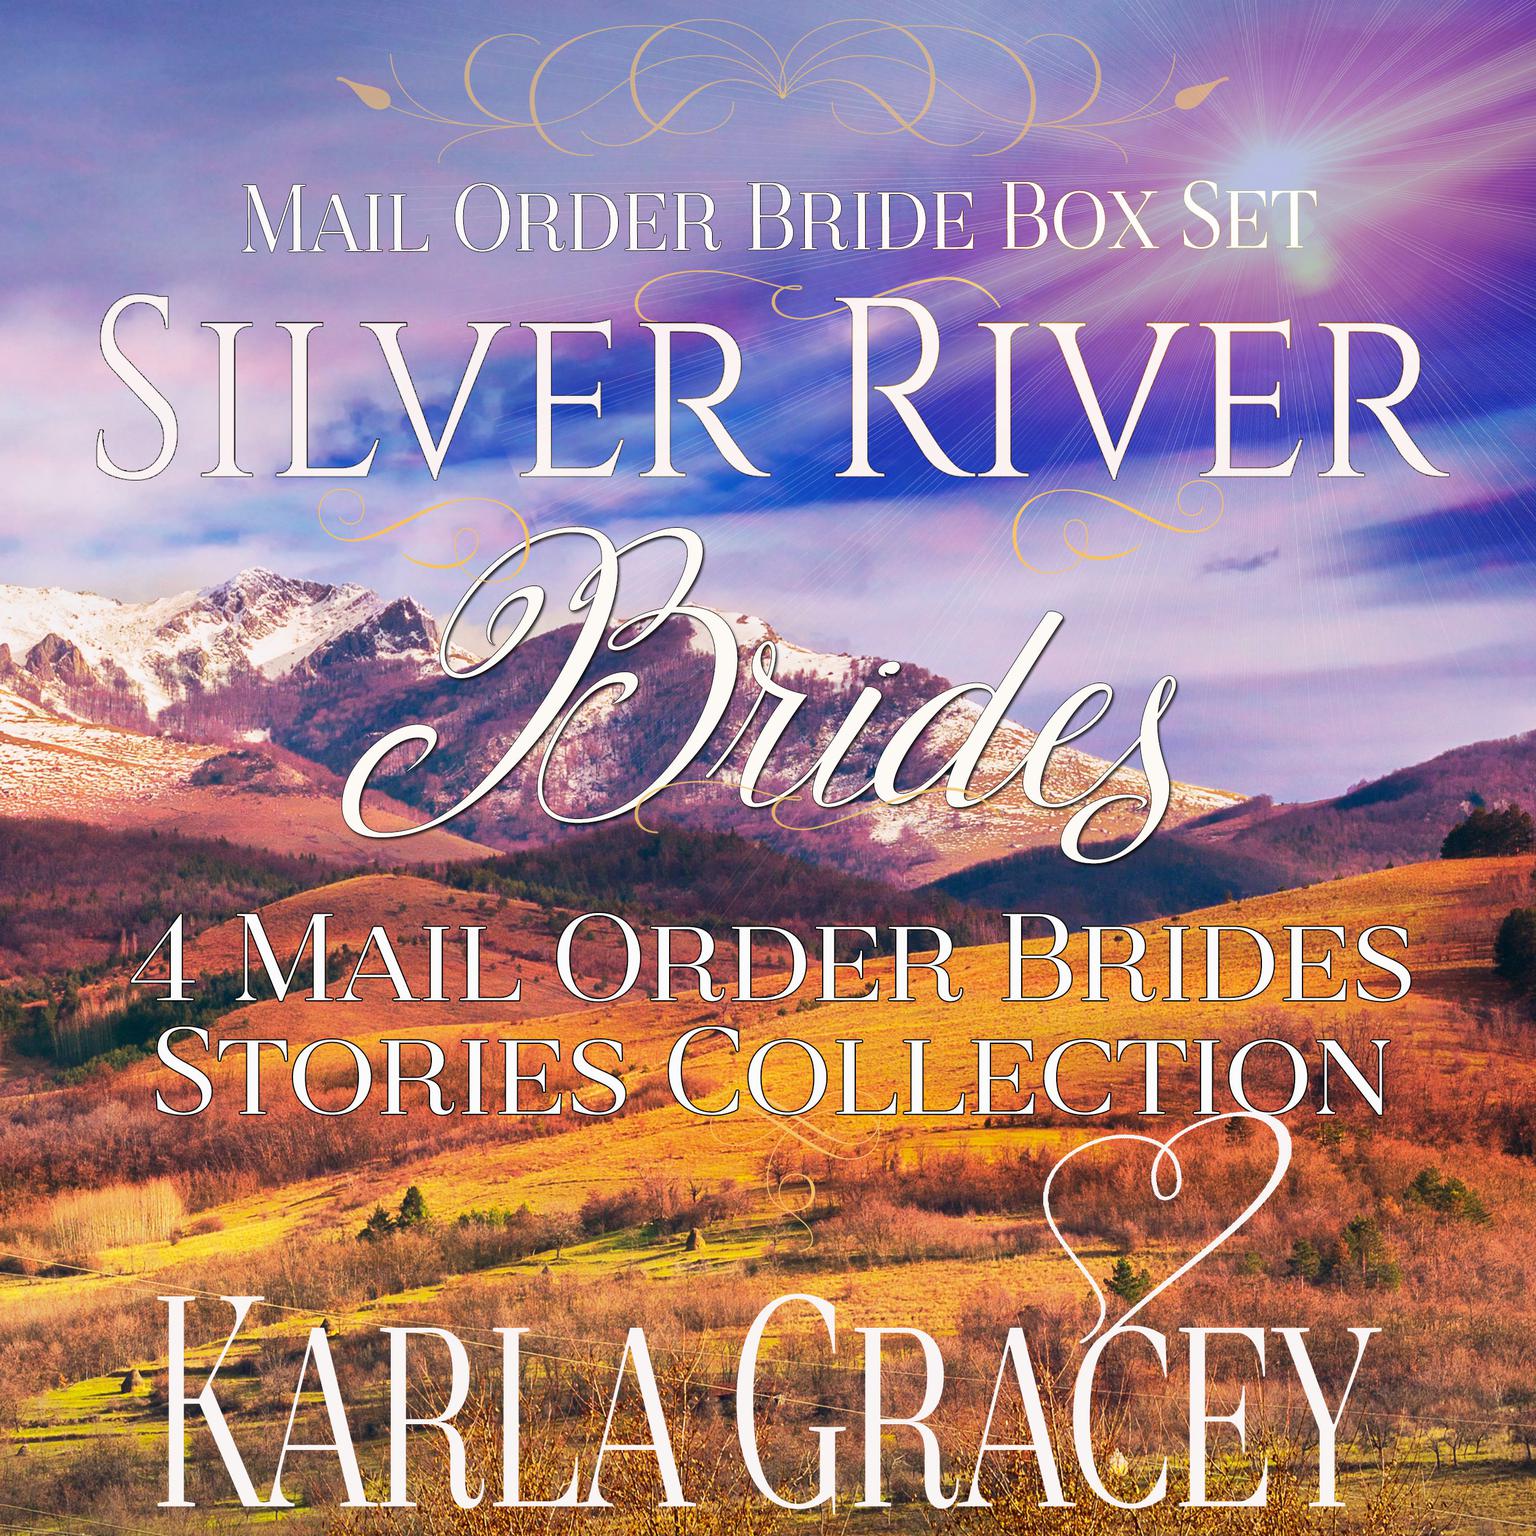 Mail Order Bride Box Set - Silver River Brides - 4 Mail Order Bride Stories Collection Audiobook, by Karla Gracey